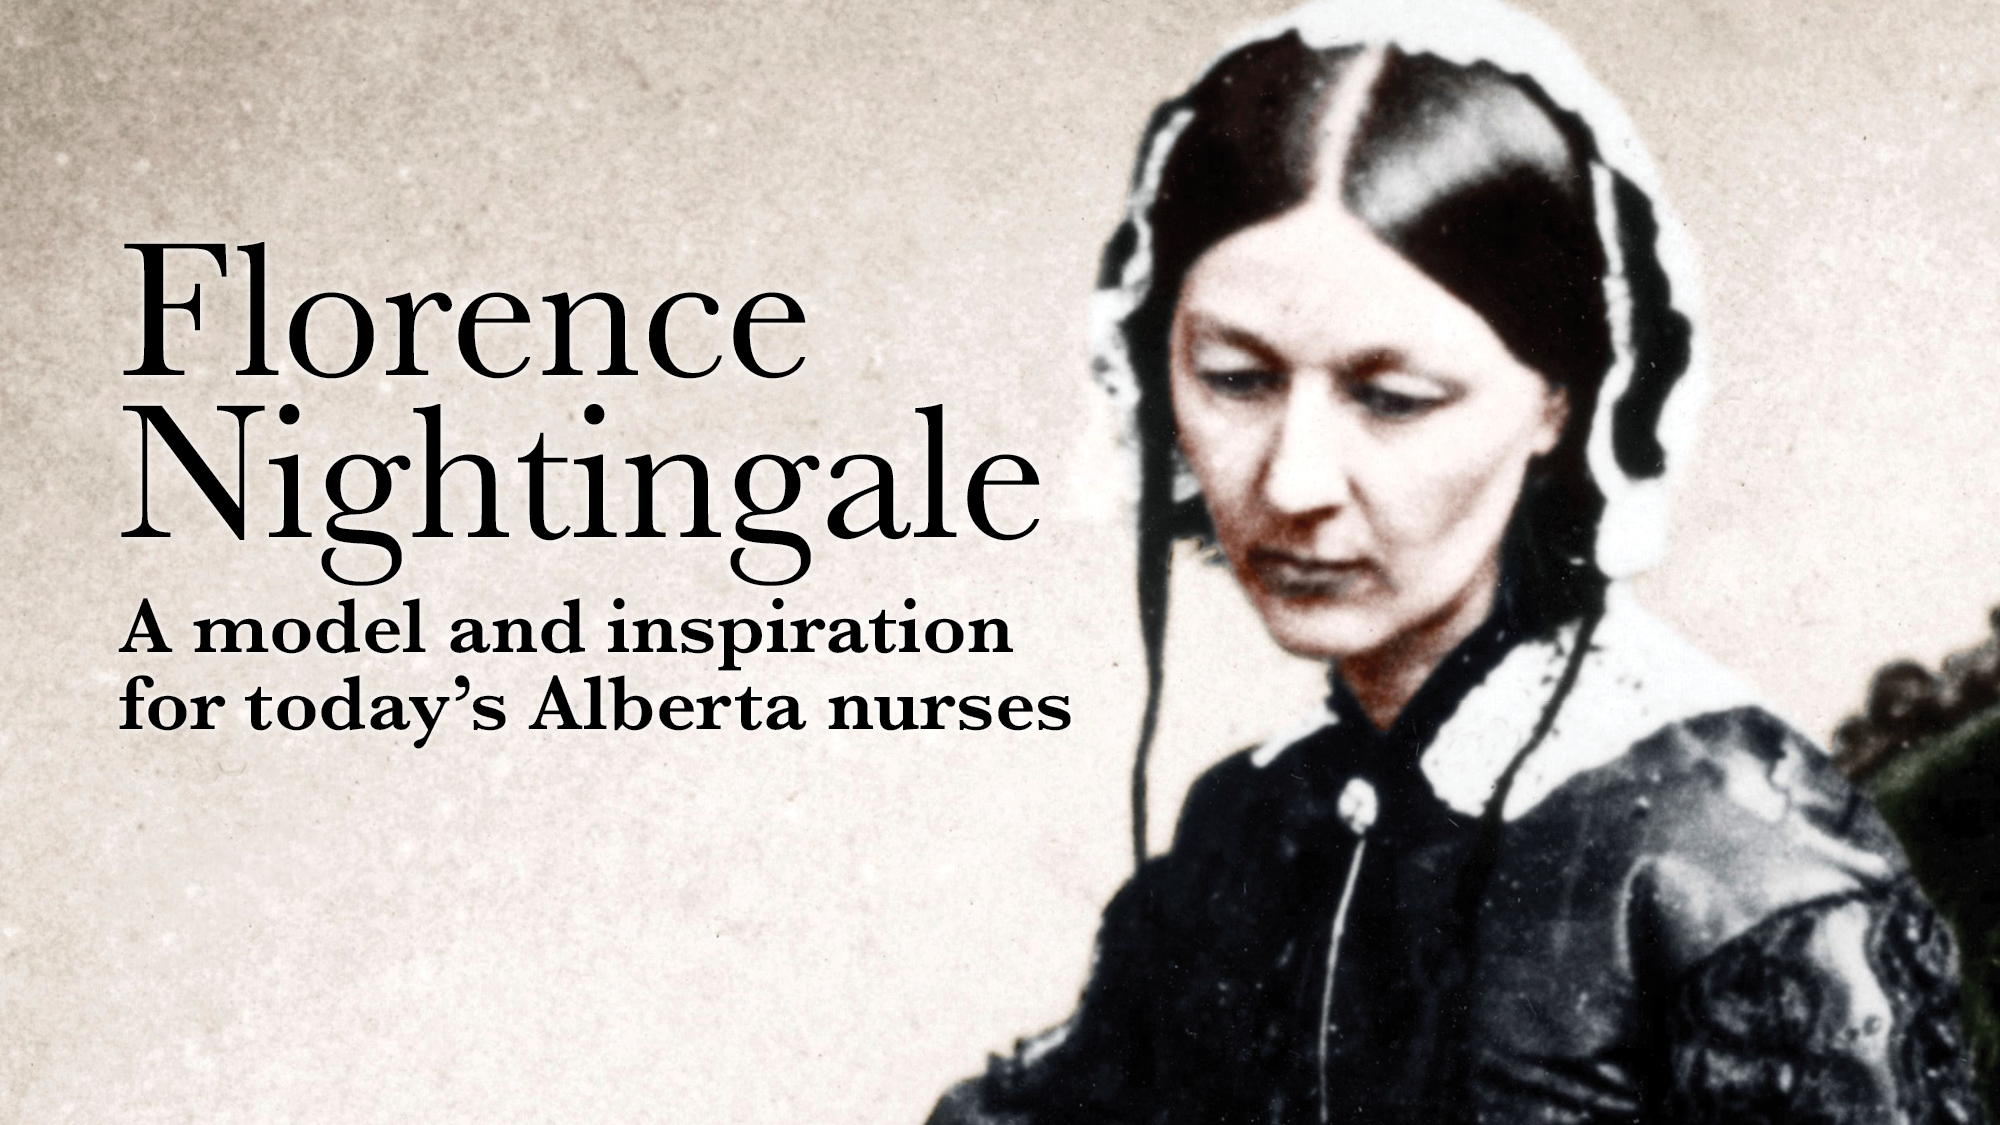 Florence Nightingale: A model and inspiration for today's Alberta nurses - UNA